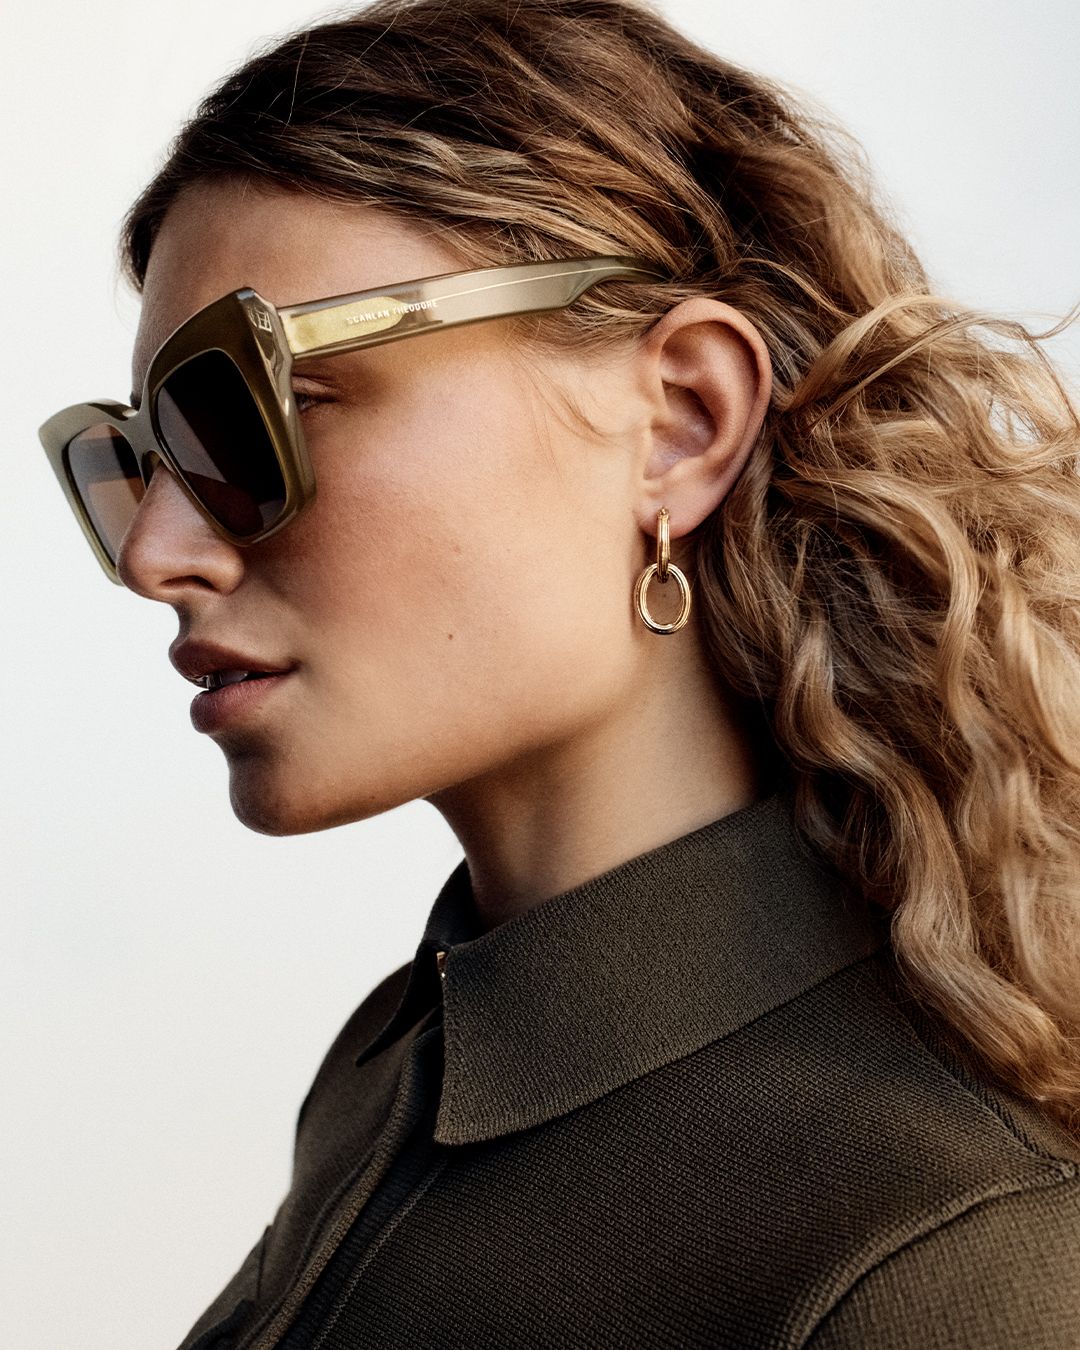 Model looking to the side wearing brown sunglasses and a khaki collared Crepe Knit dress with long curly blonde hair